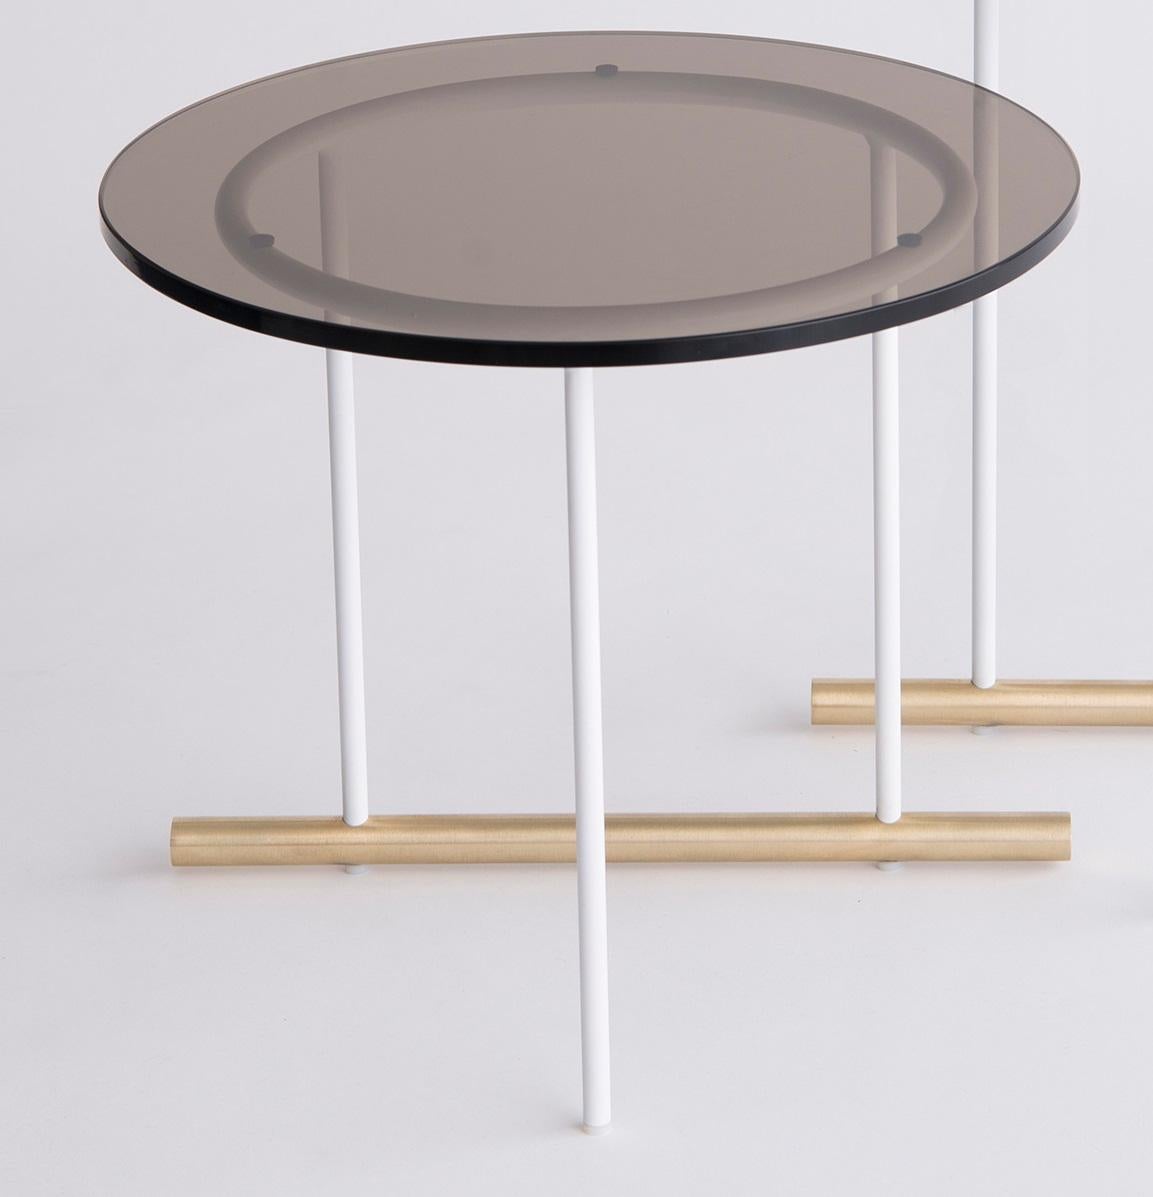 Icon Medium Glass Coffee Table by Phase Design
Dimensions: Ø 45.7 x H 40.6 cm. 
Materials: Glass, powder-coated metal and brushed brass.

Solid steel and brass with glass, marble, or solid wooden tops. Steel bar available in a flat black or white